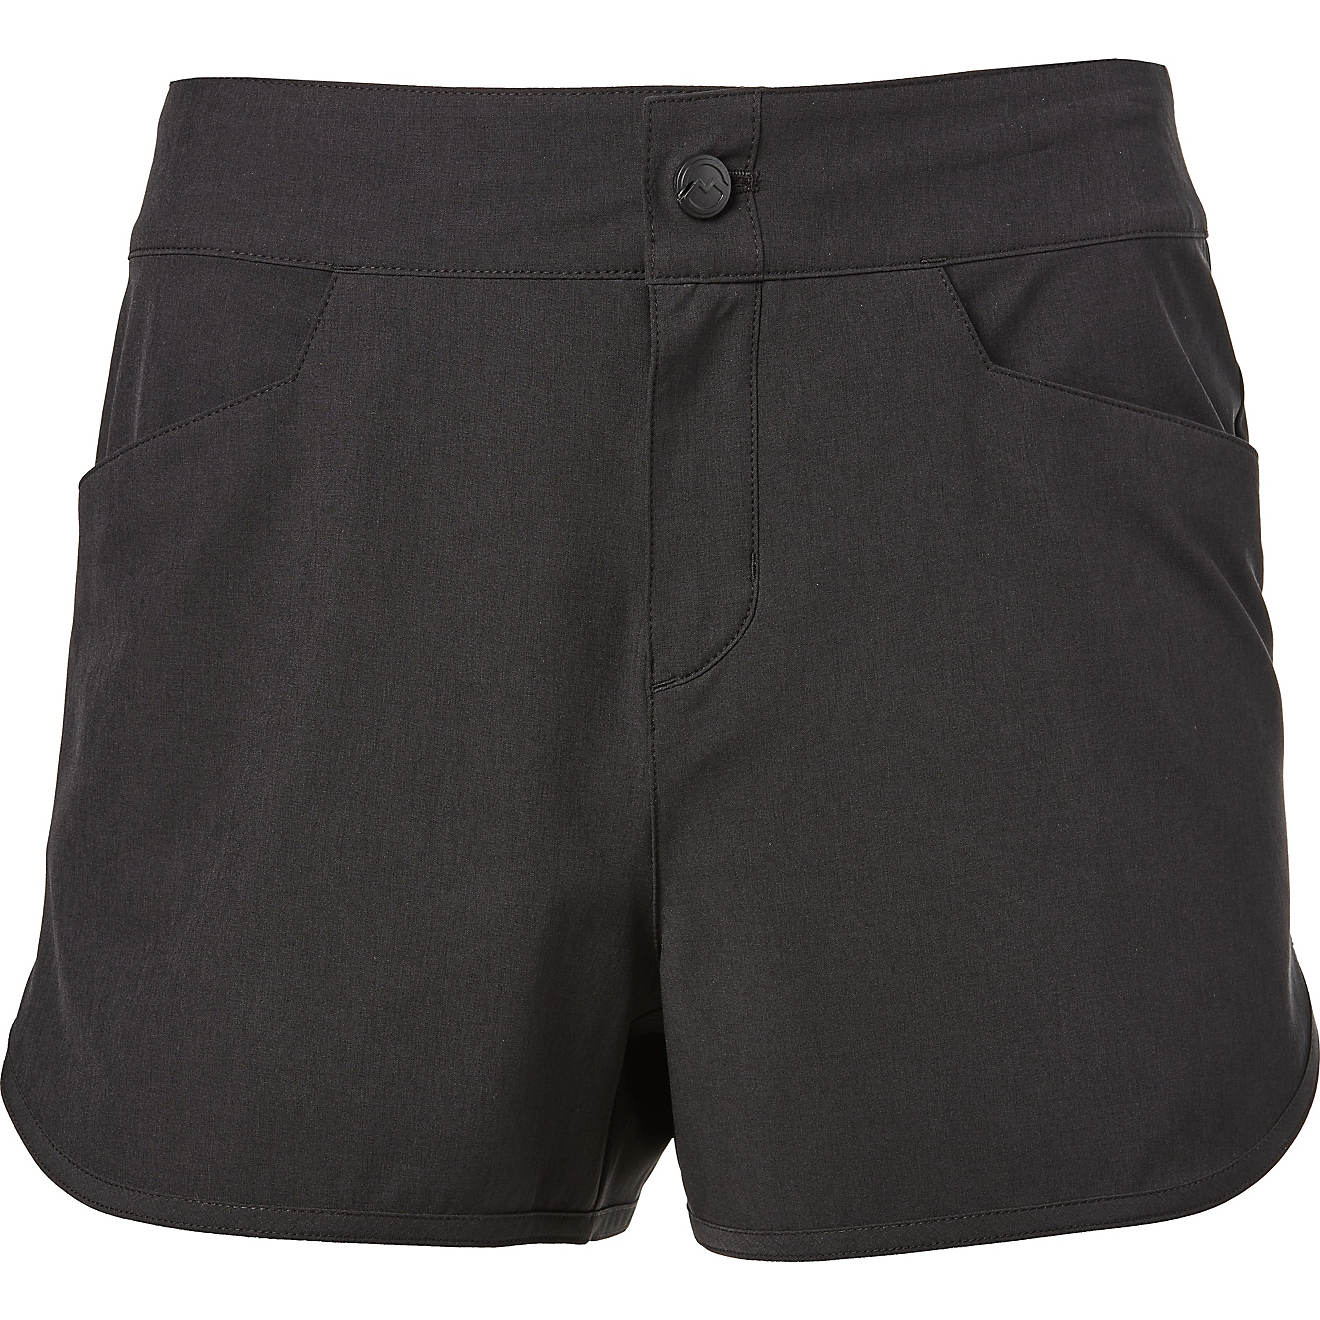 Magellan Outdoors Women's Pro Technical Shorties on Sale At Academy Sports + Outdoors